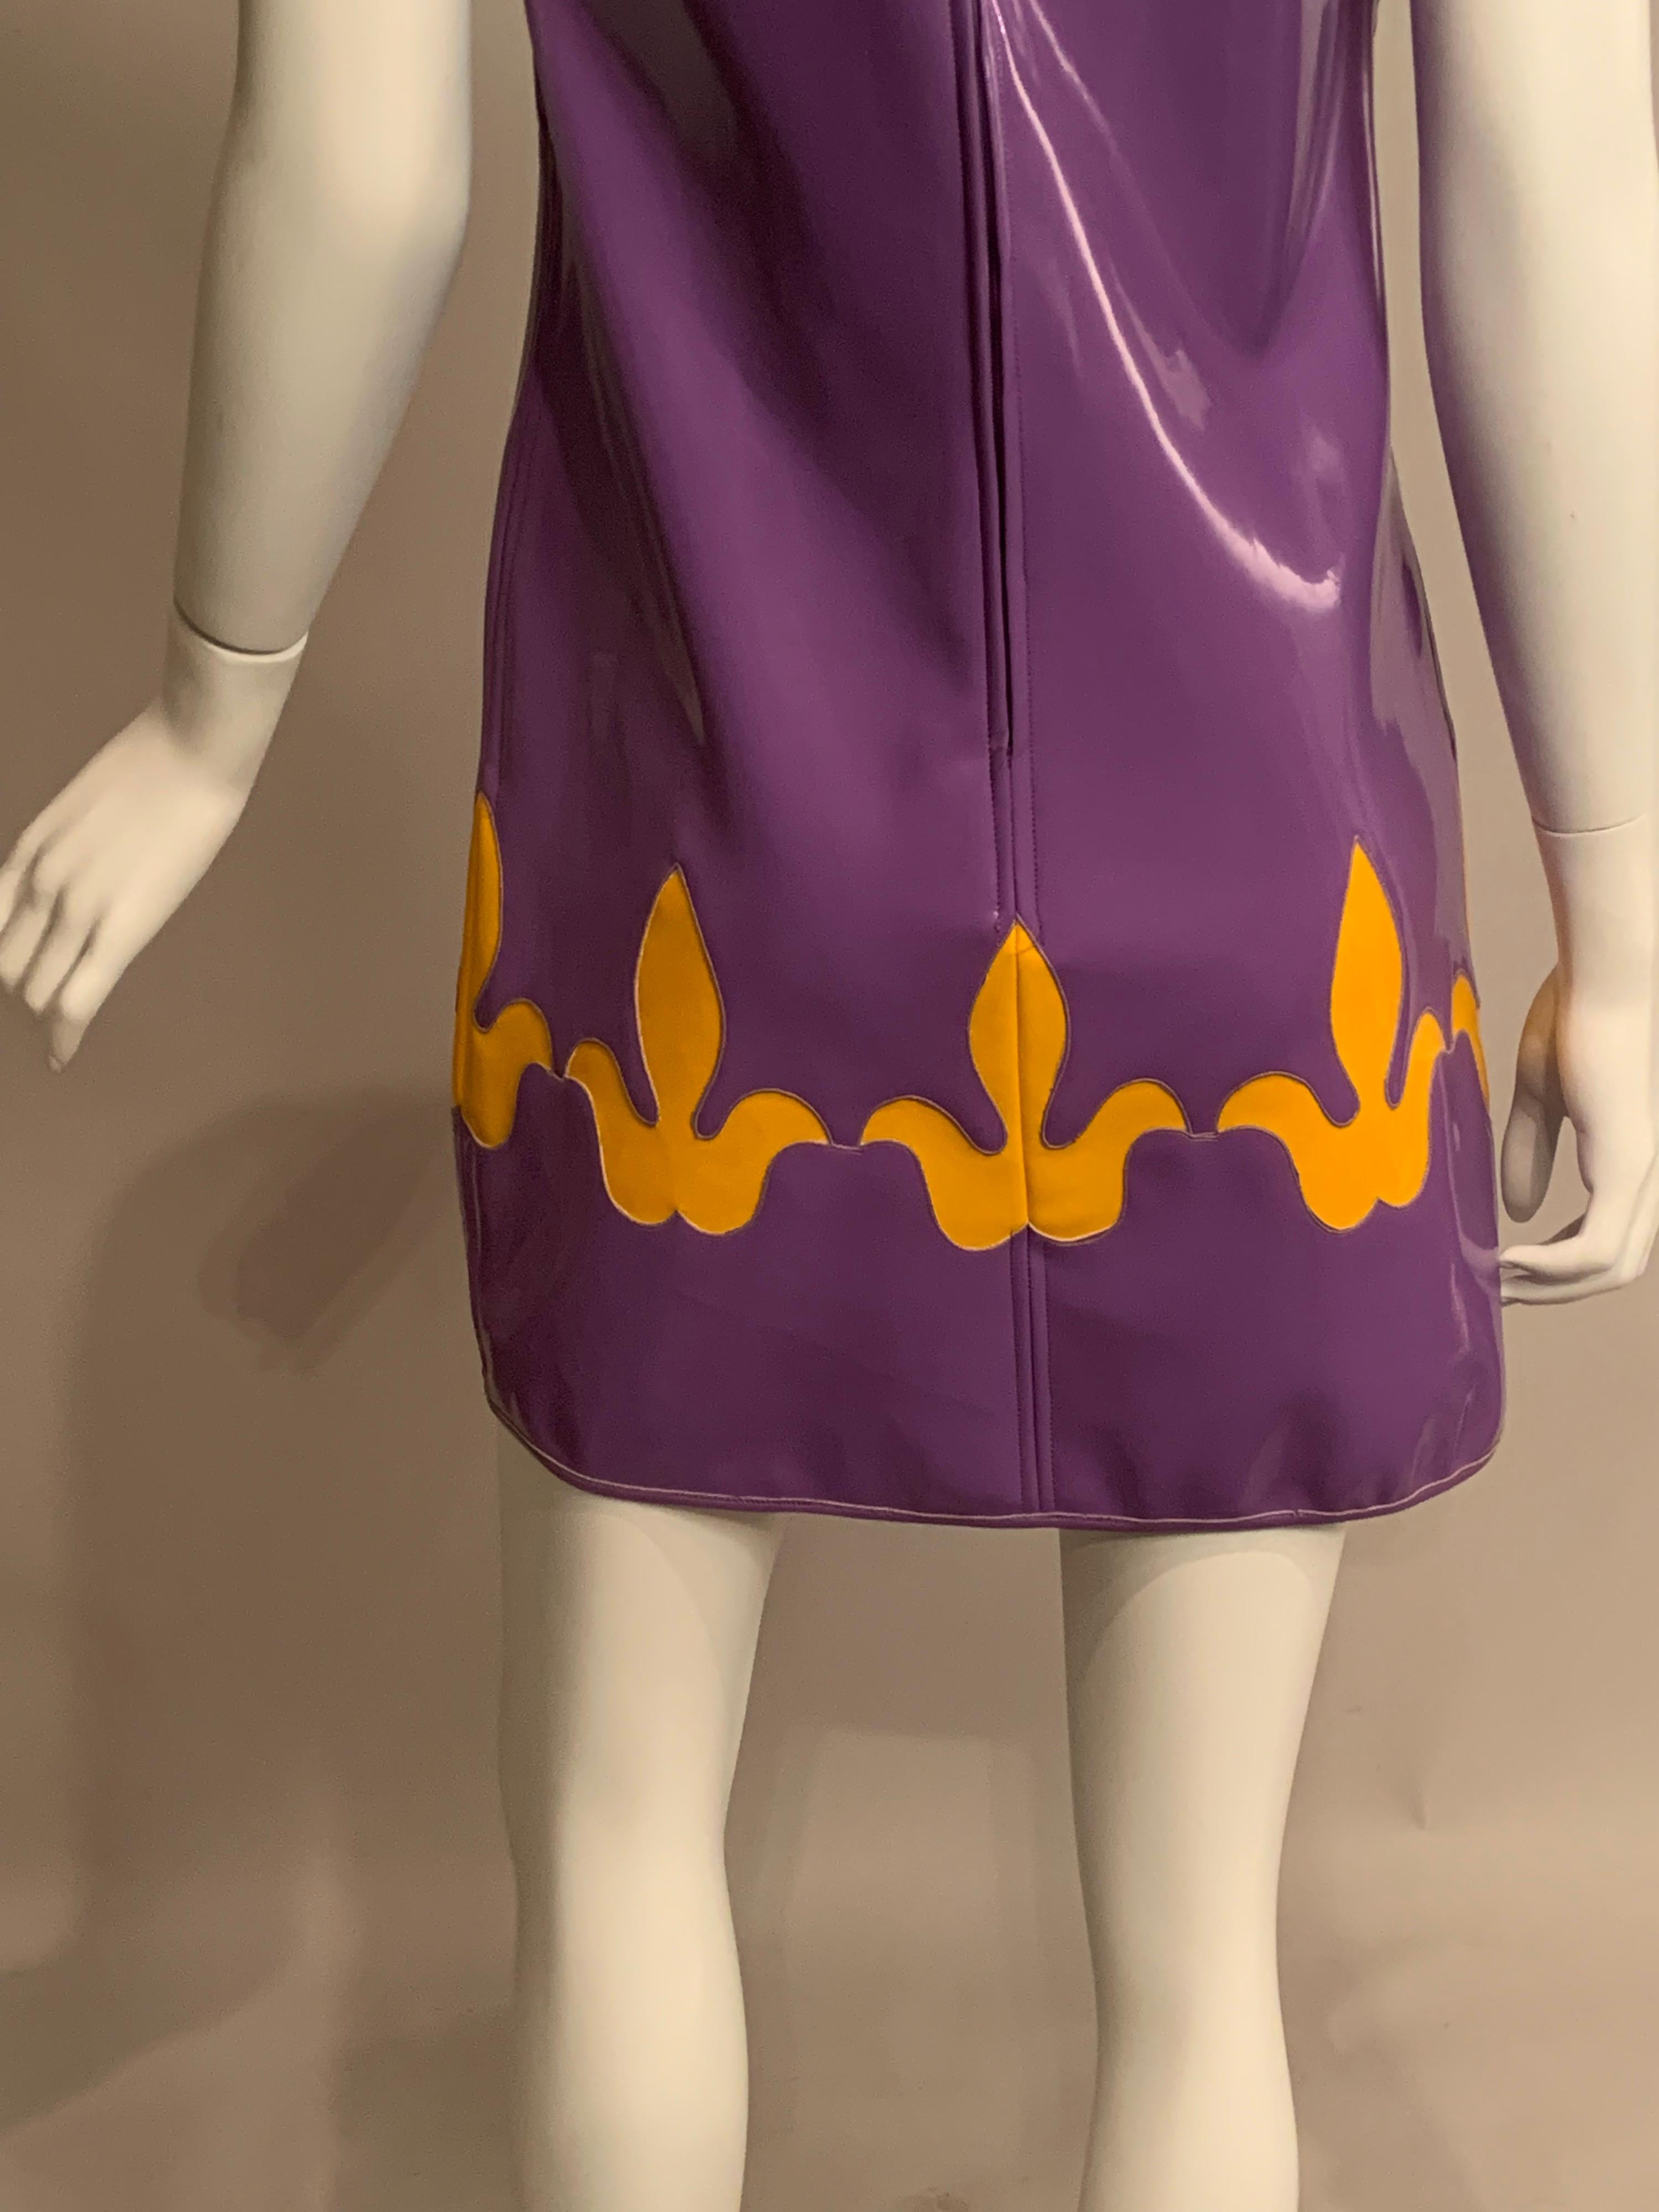 1960’s Tuffin and Foale Youthquake Lavender and Yellow Vinyl Dress Never Worn 2